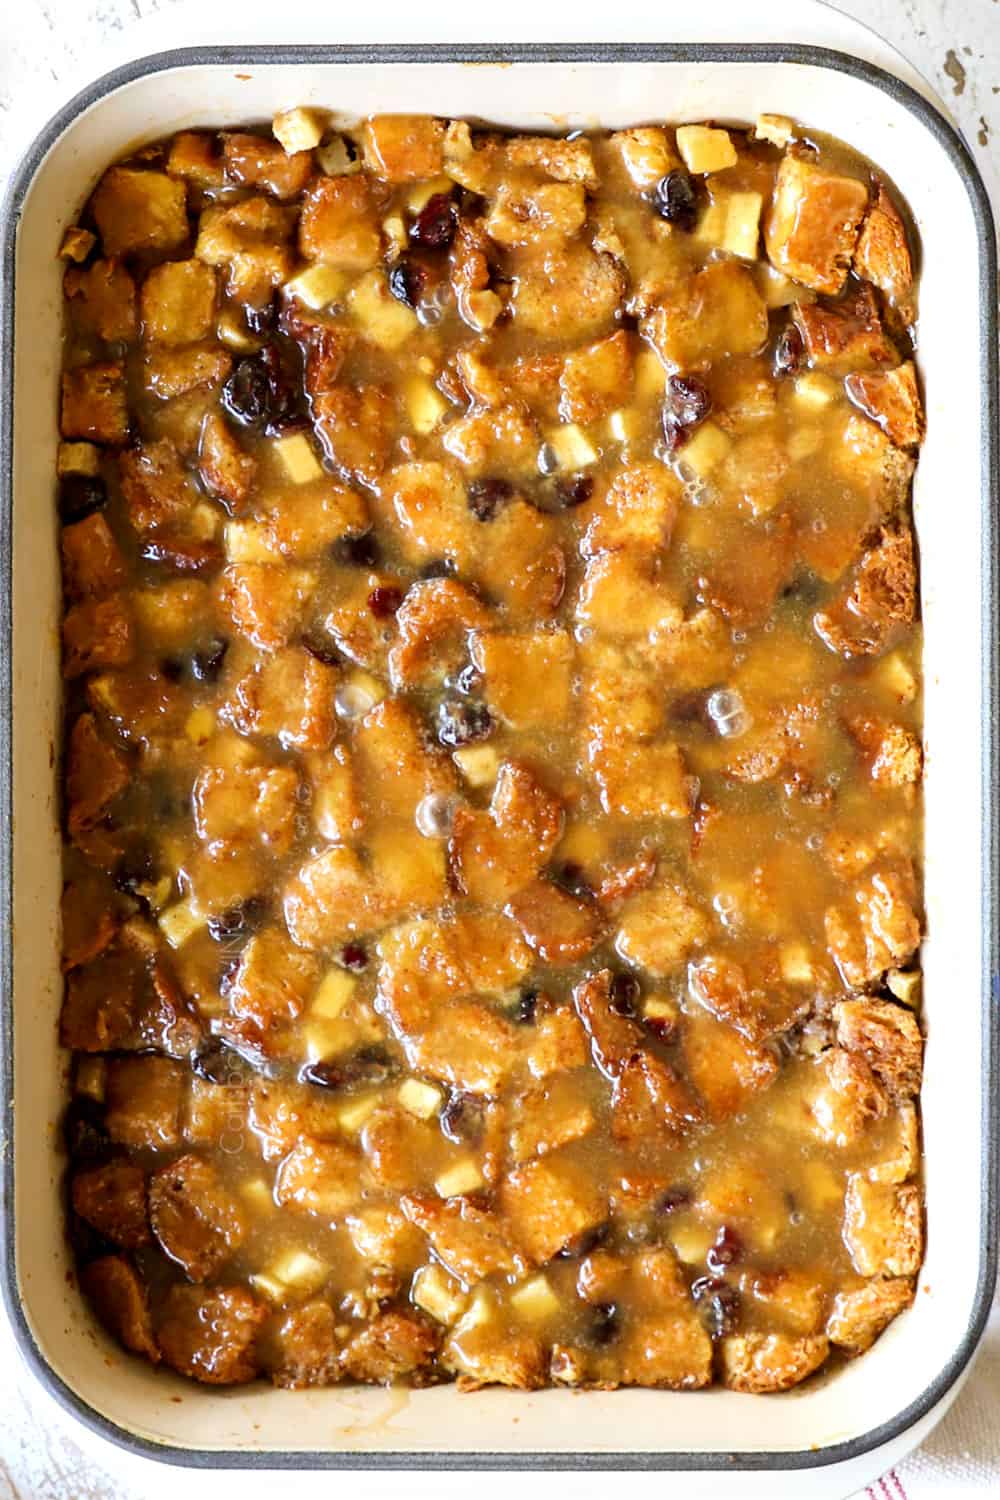 top view of bread pudding with caramel sauce